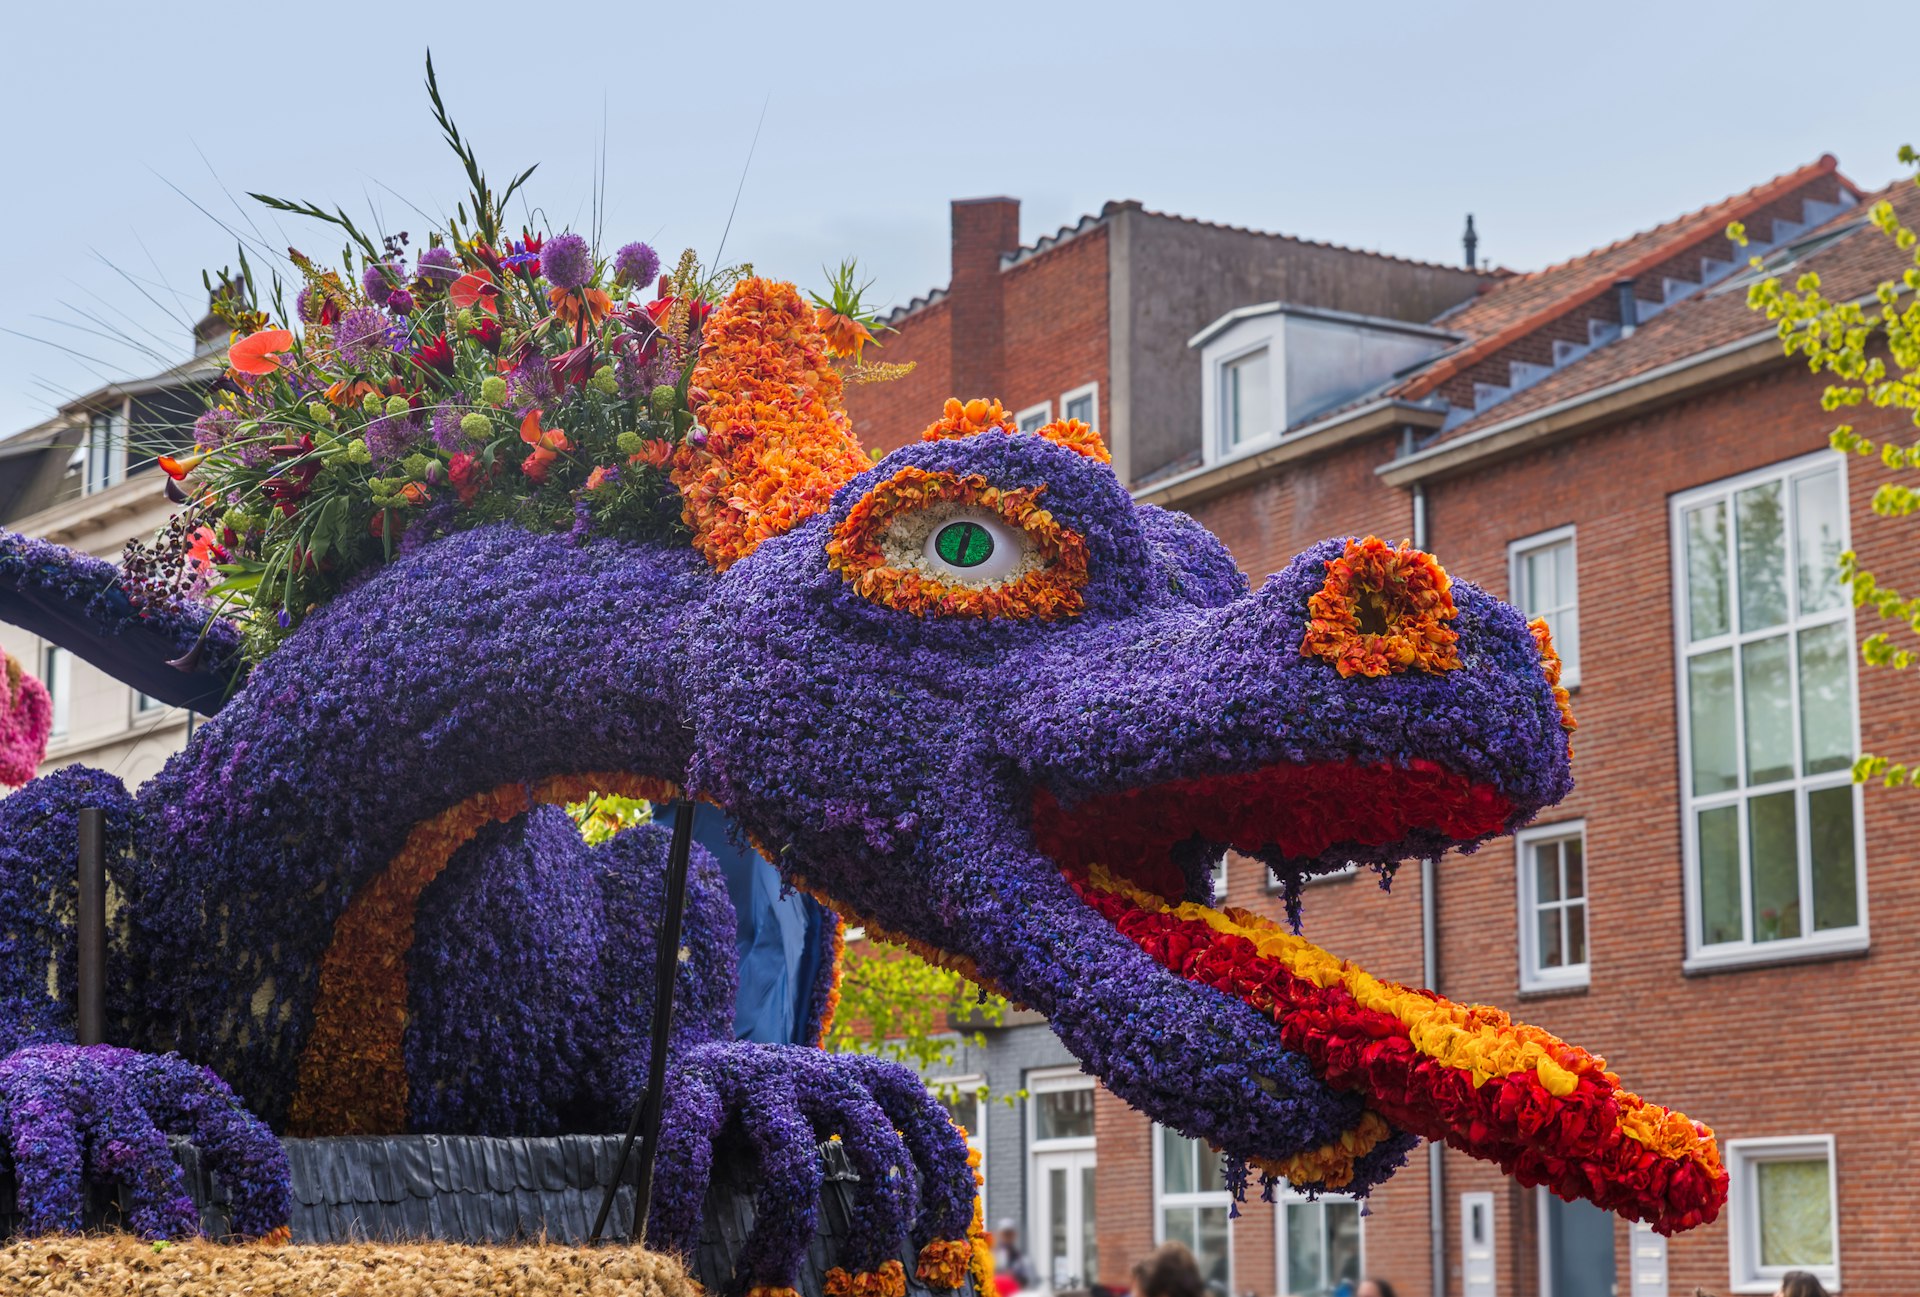 A float made of flowers in the form a dragon, part of the Bloemencorso, Haarlem, Netherlands